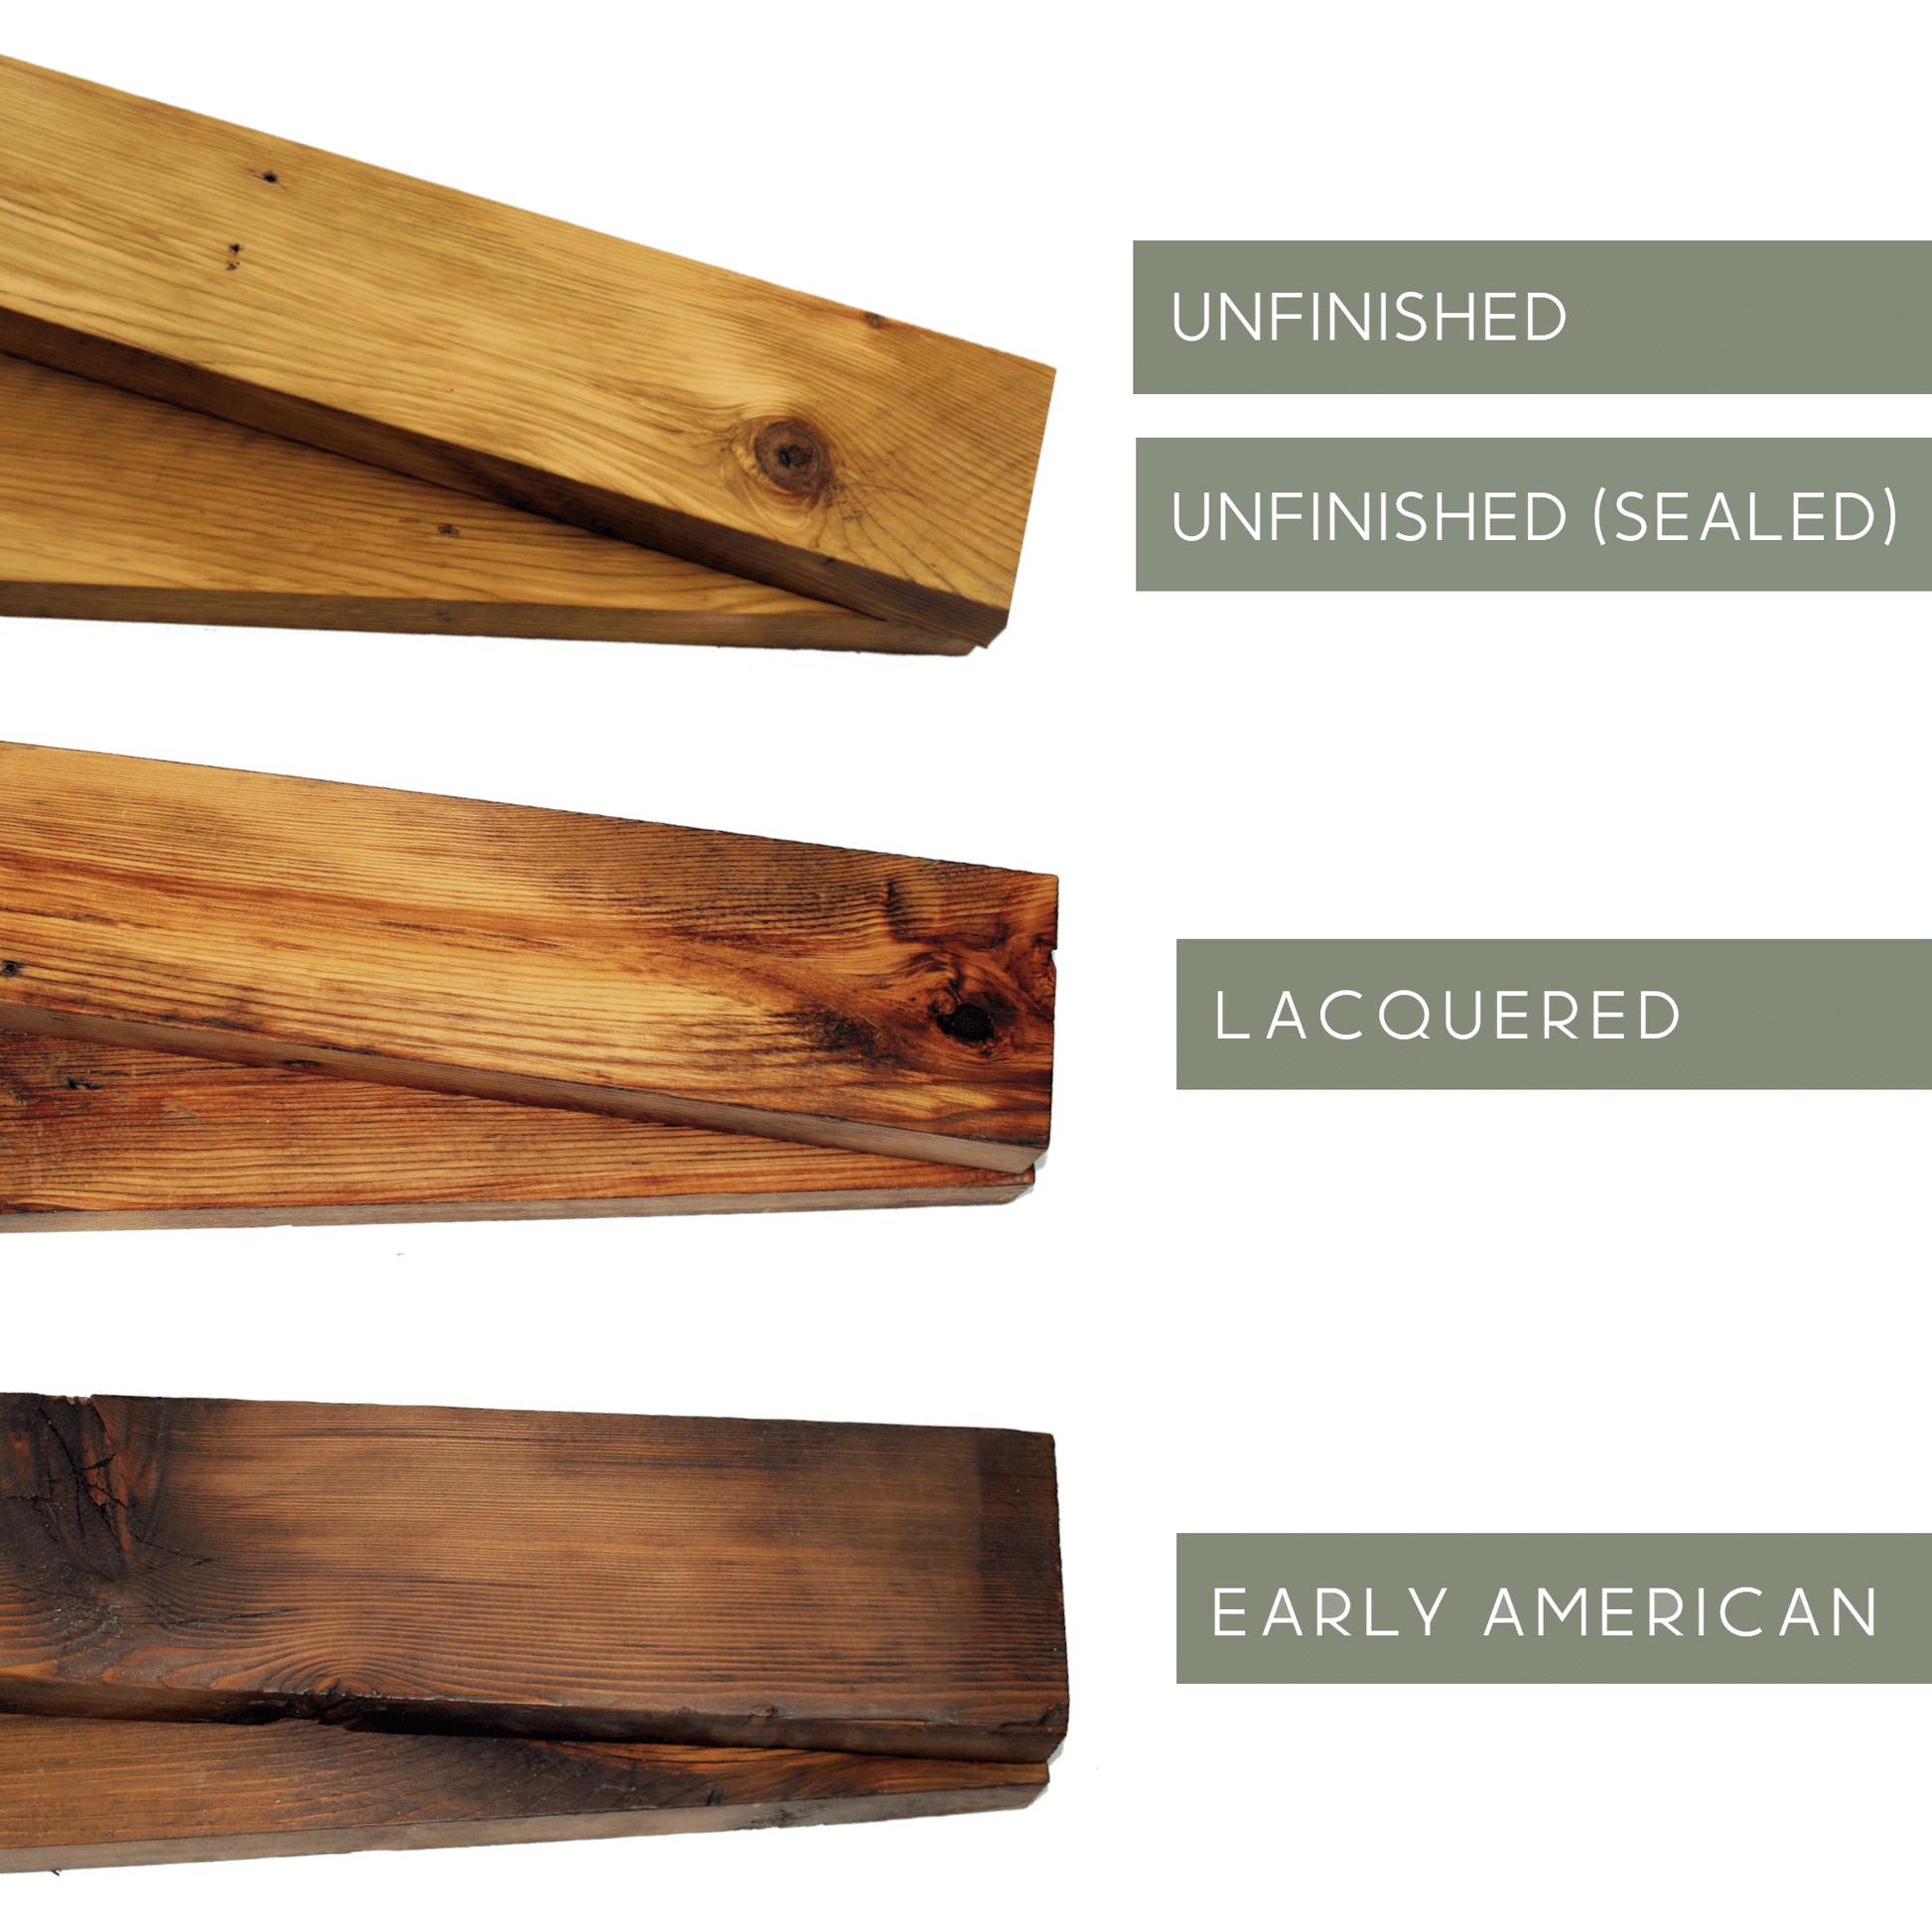 a graphic showing the difference in the finishes offered. Starting at the top is unfinished, unfinished sealed, lacquered, and early american.